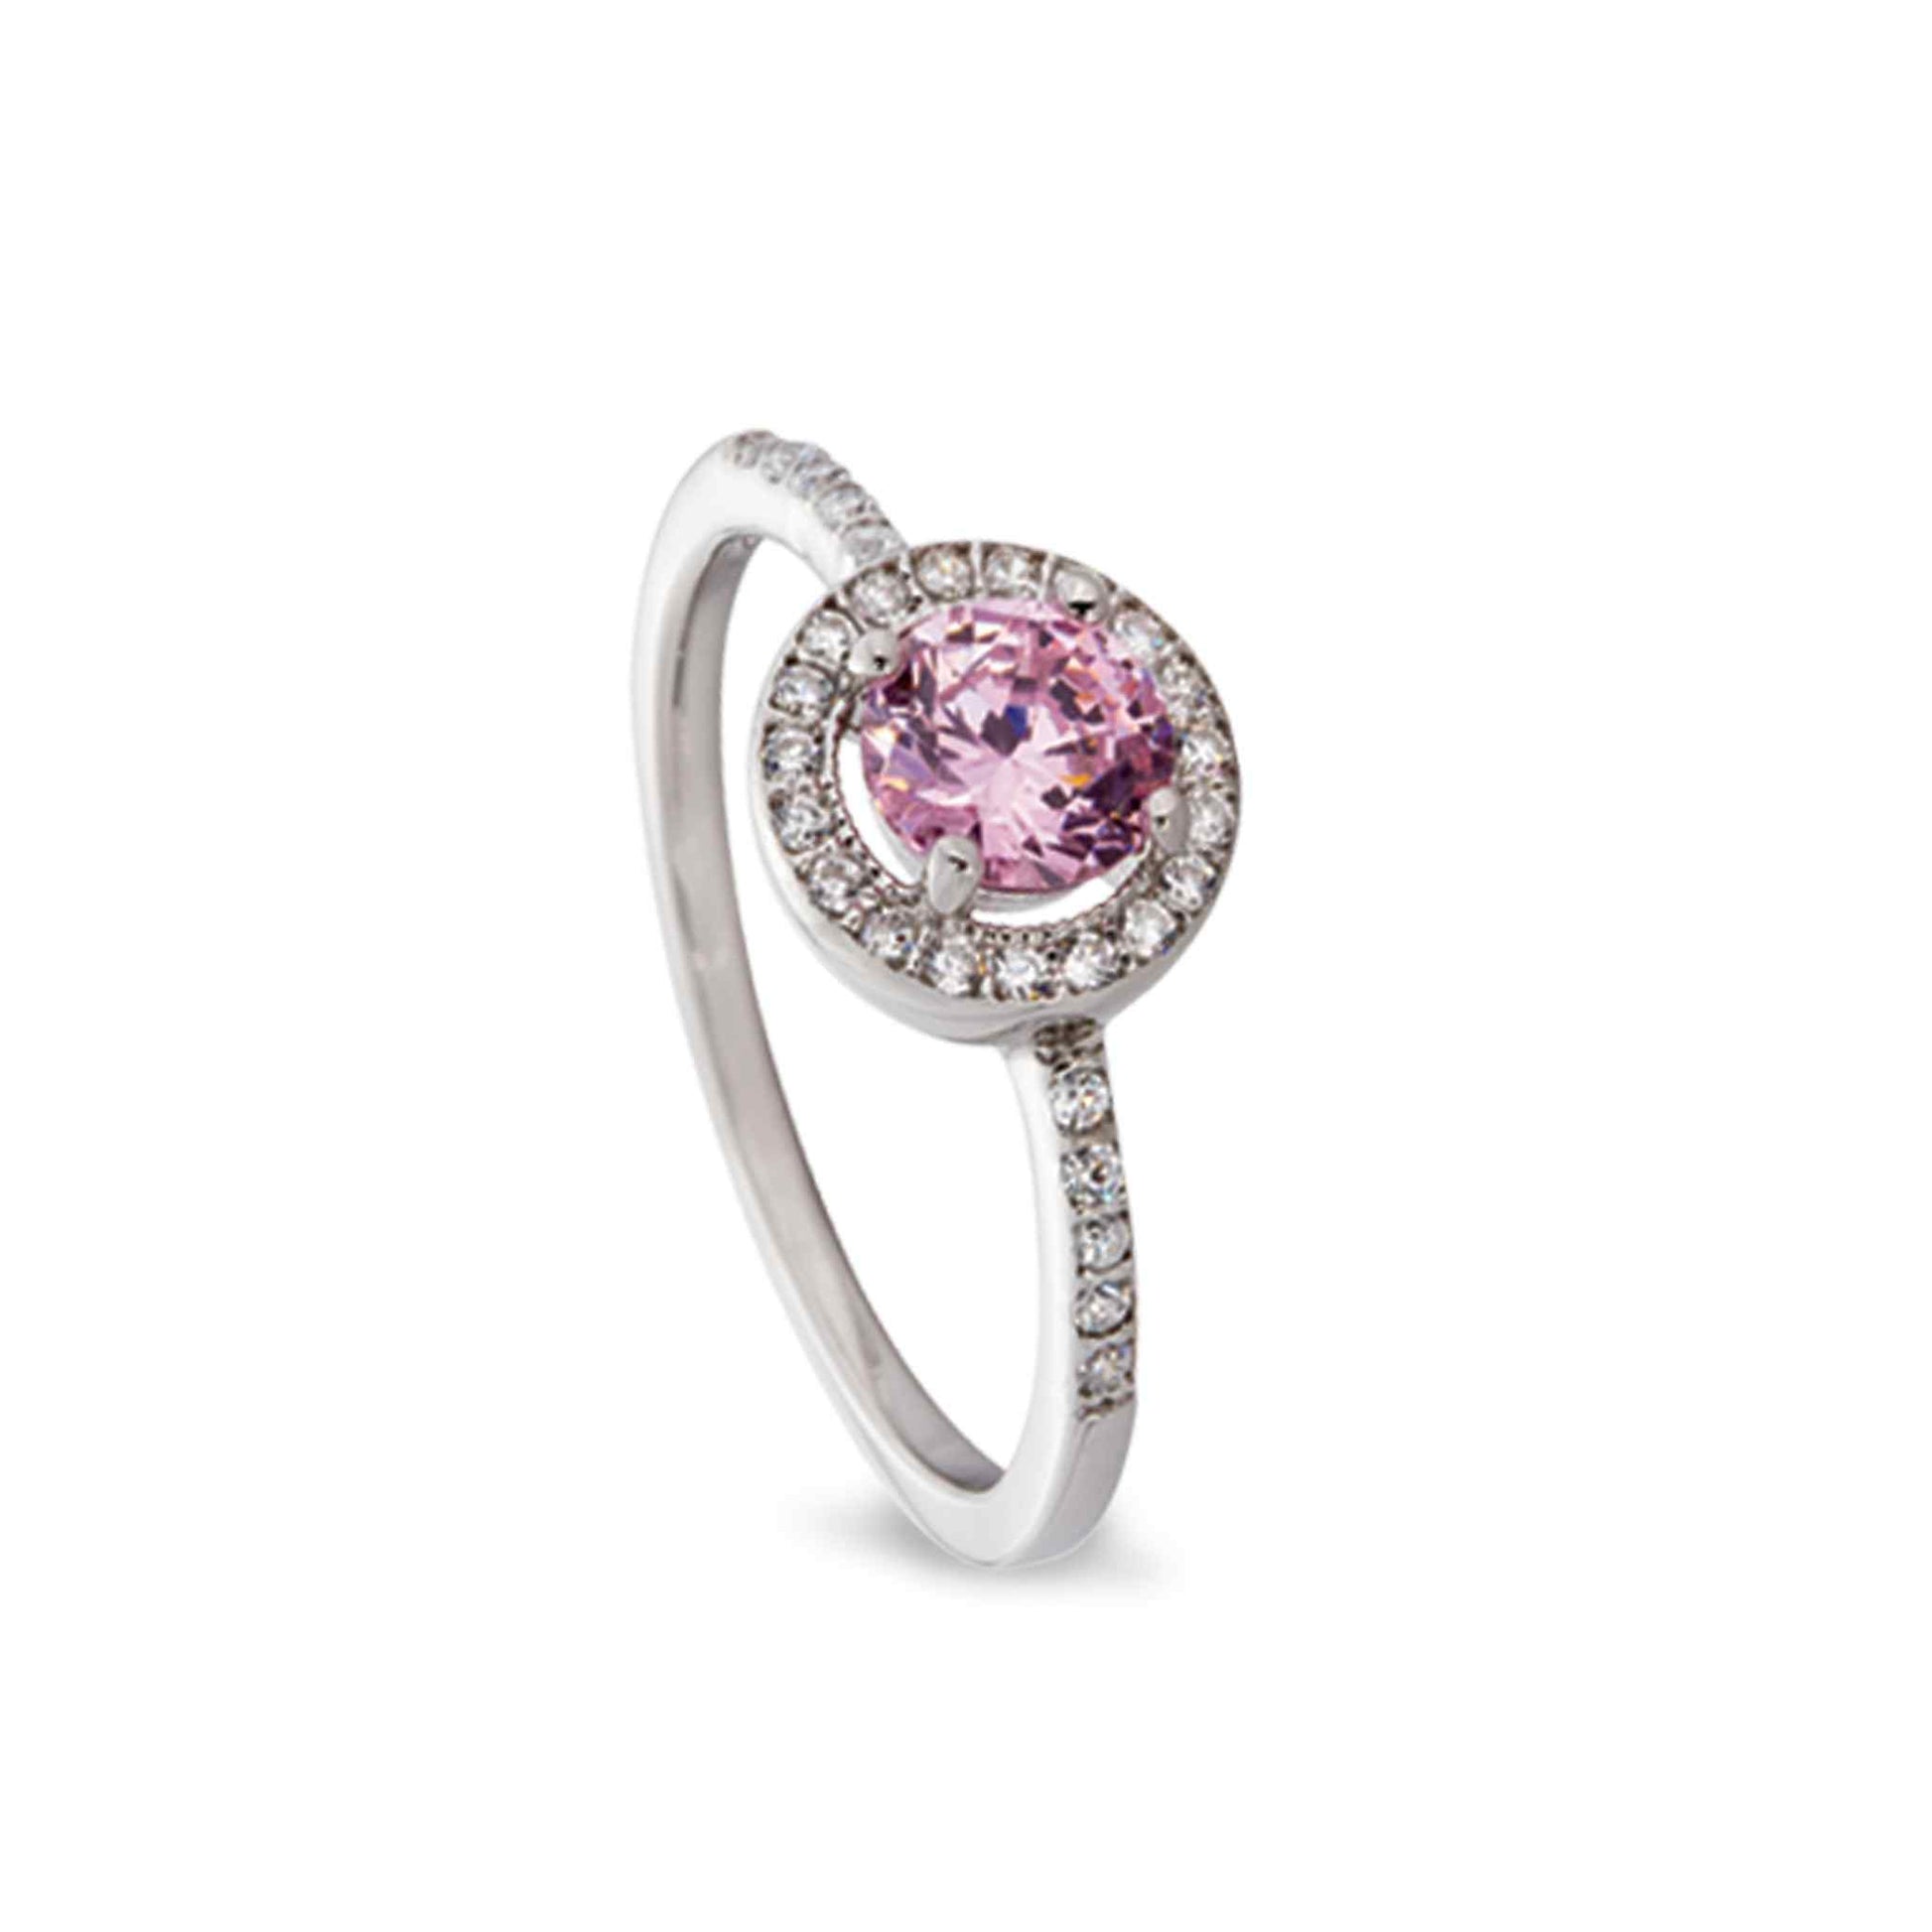 A simulated pink sapphire ring with simulated diamonds displayed on a neutral white background.